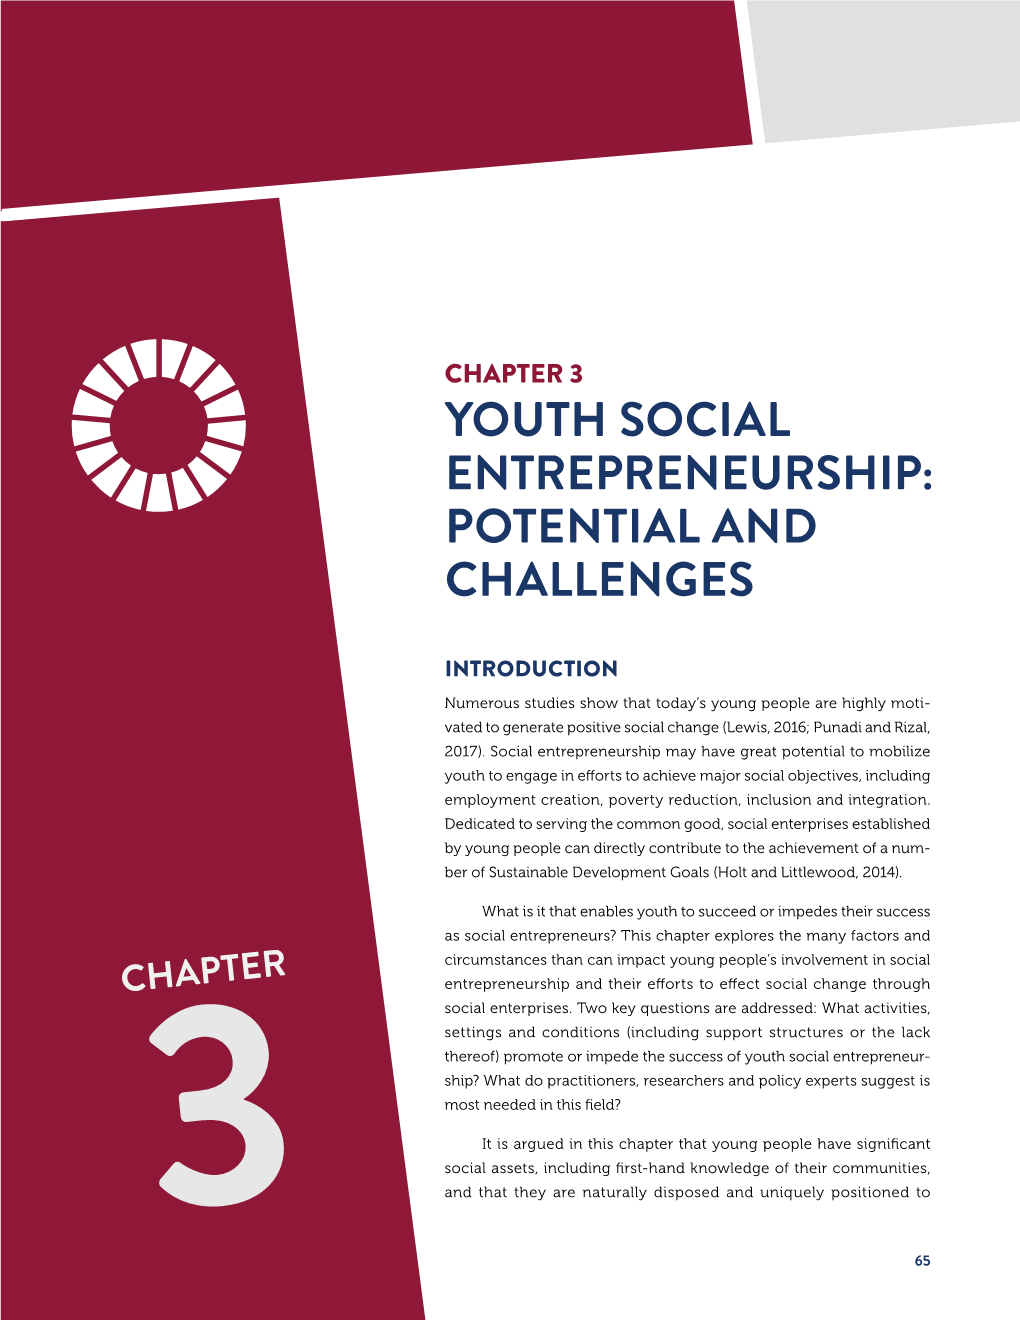 Chapter 3: Youth Social Entrepreneurship: Potential And